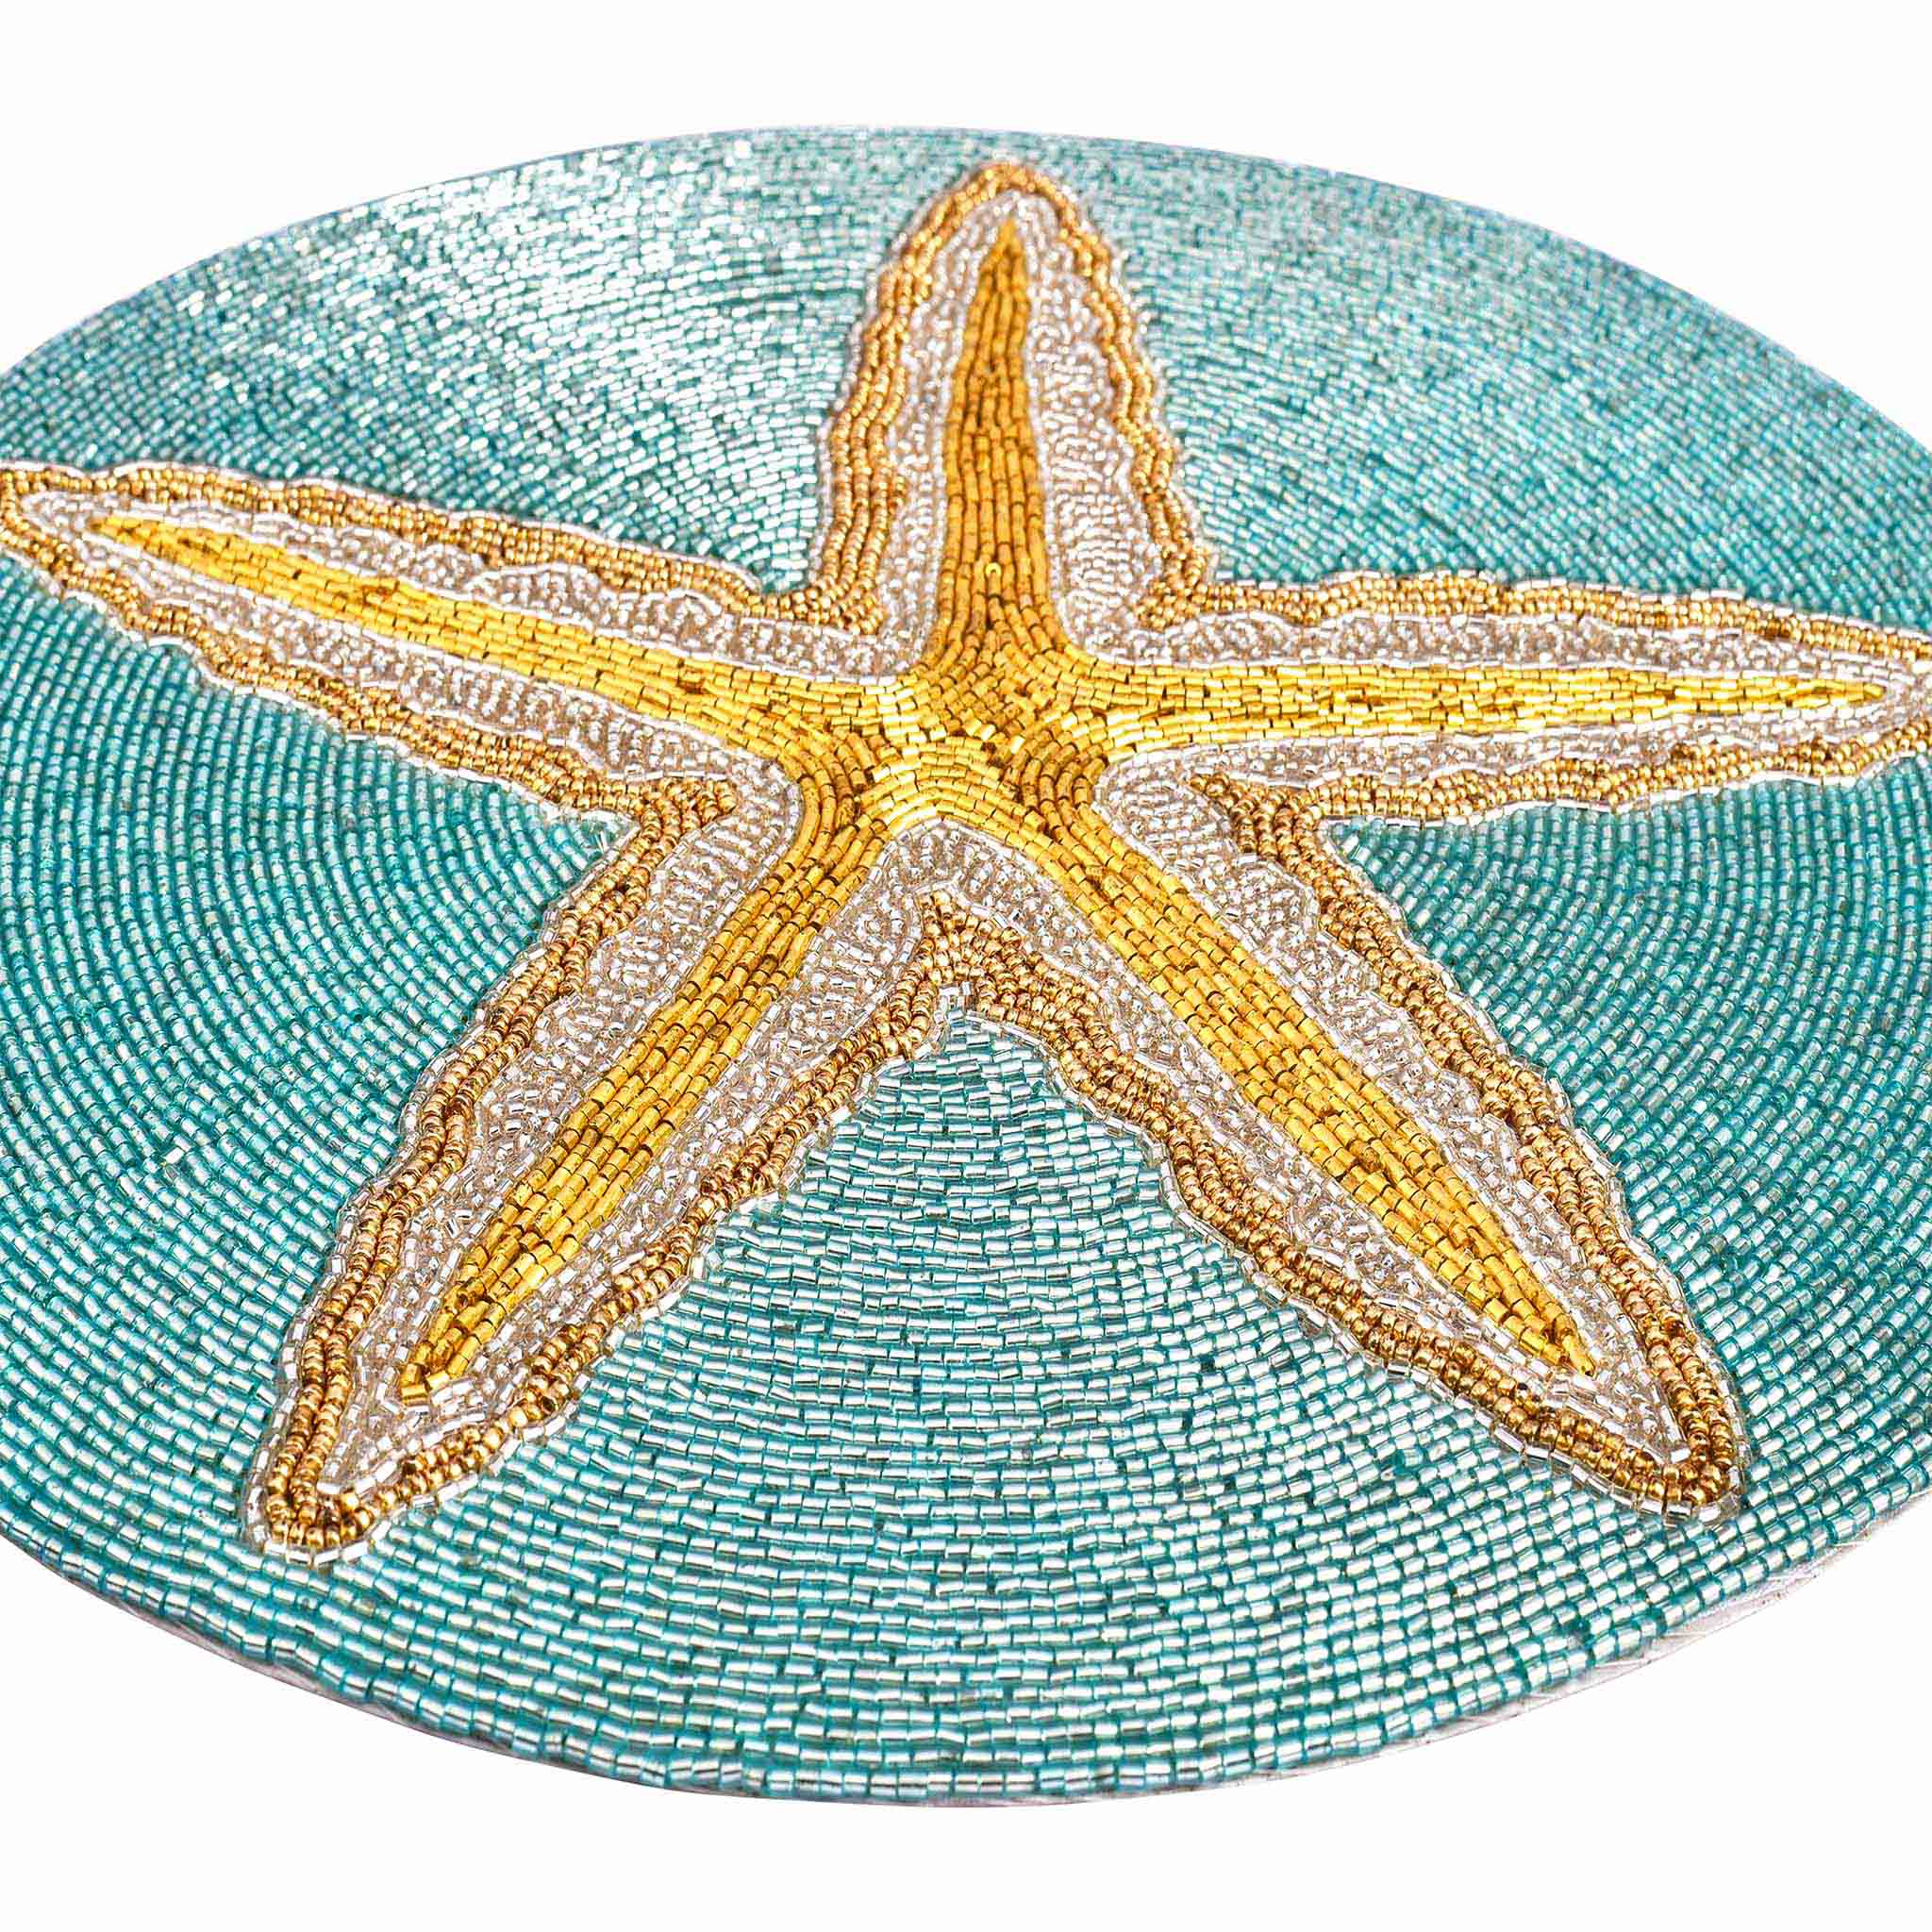 Ringo Star Fish Embroidered Placemat in Teal & Gold, Set of 2/4